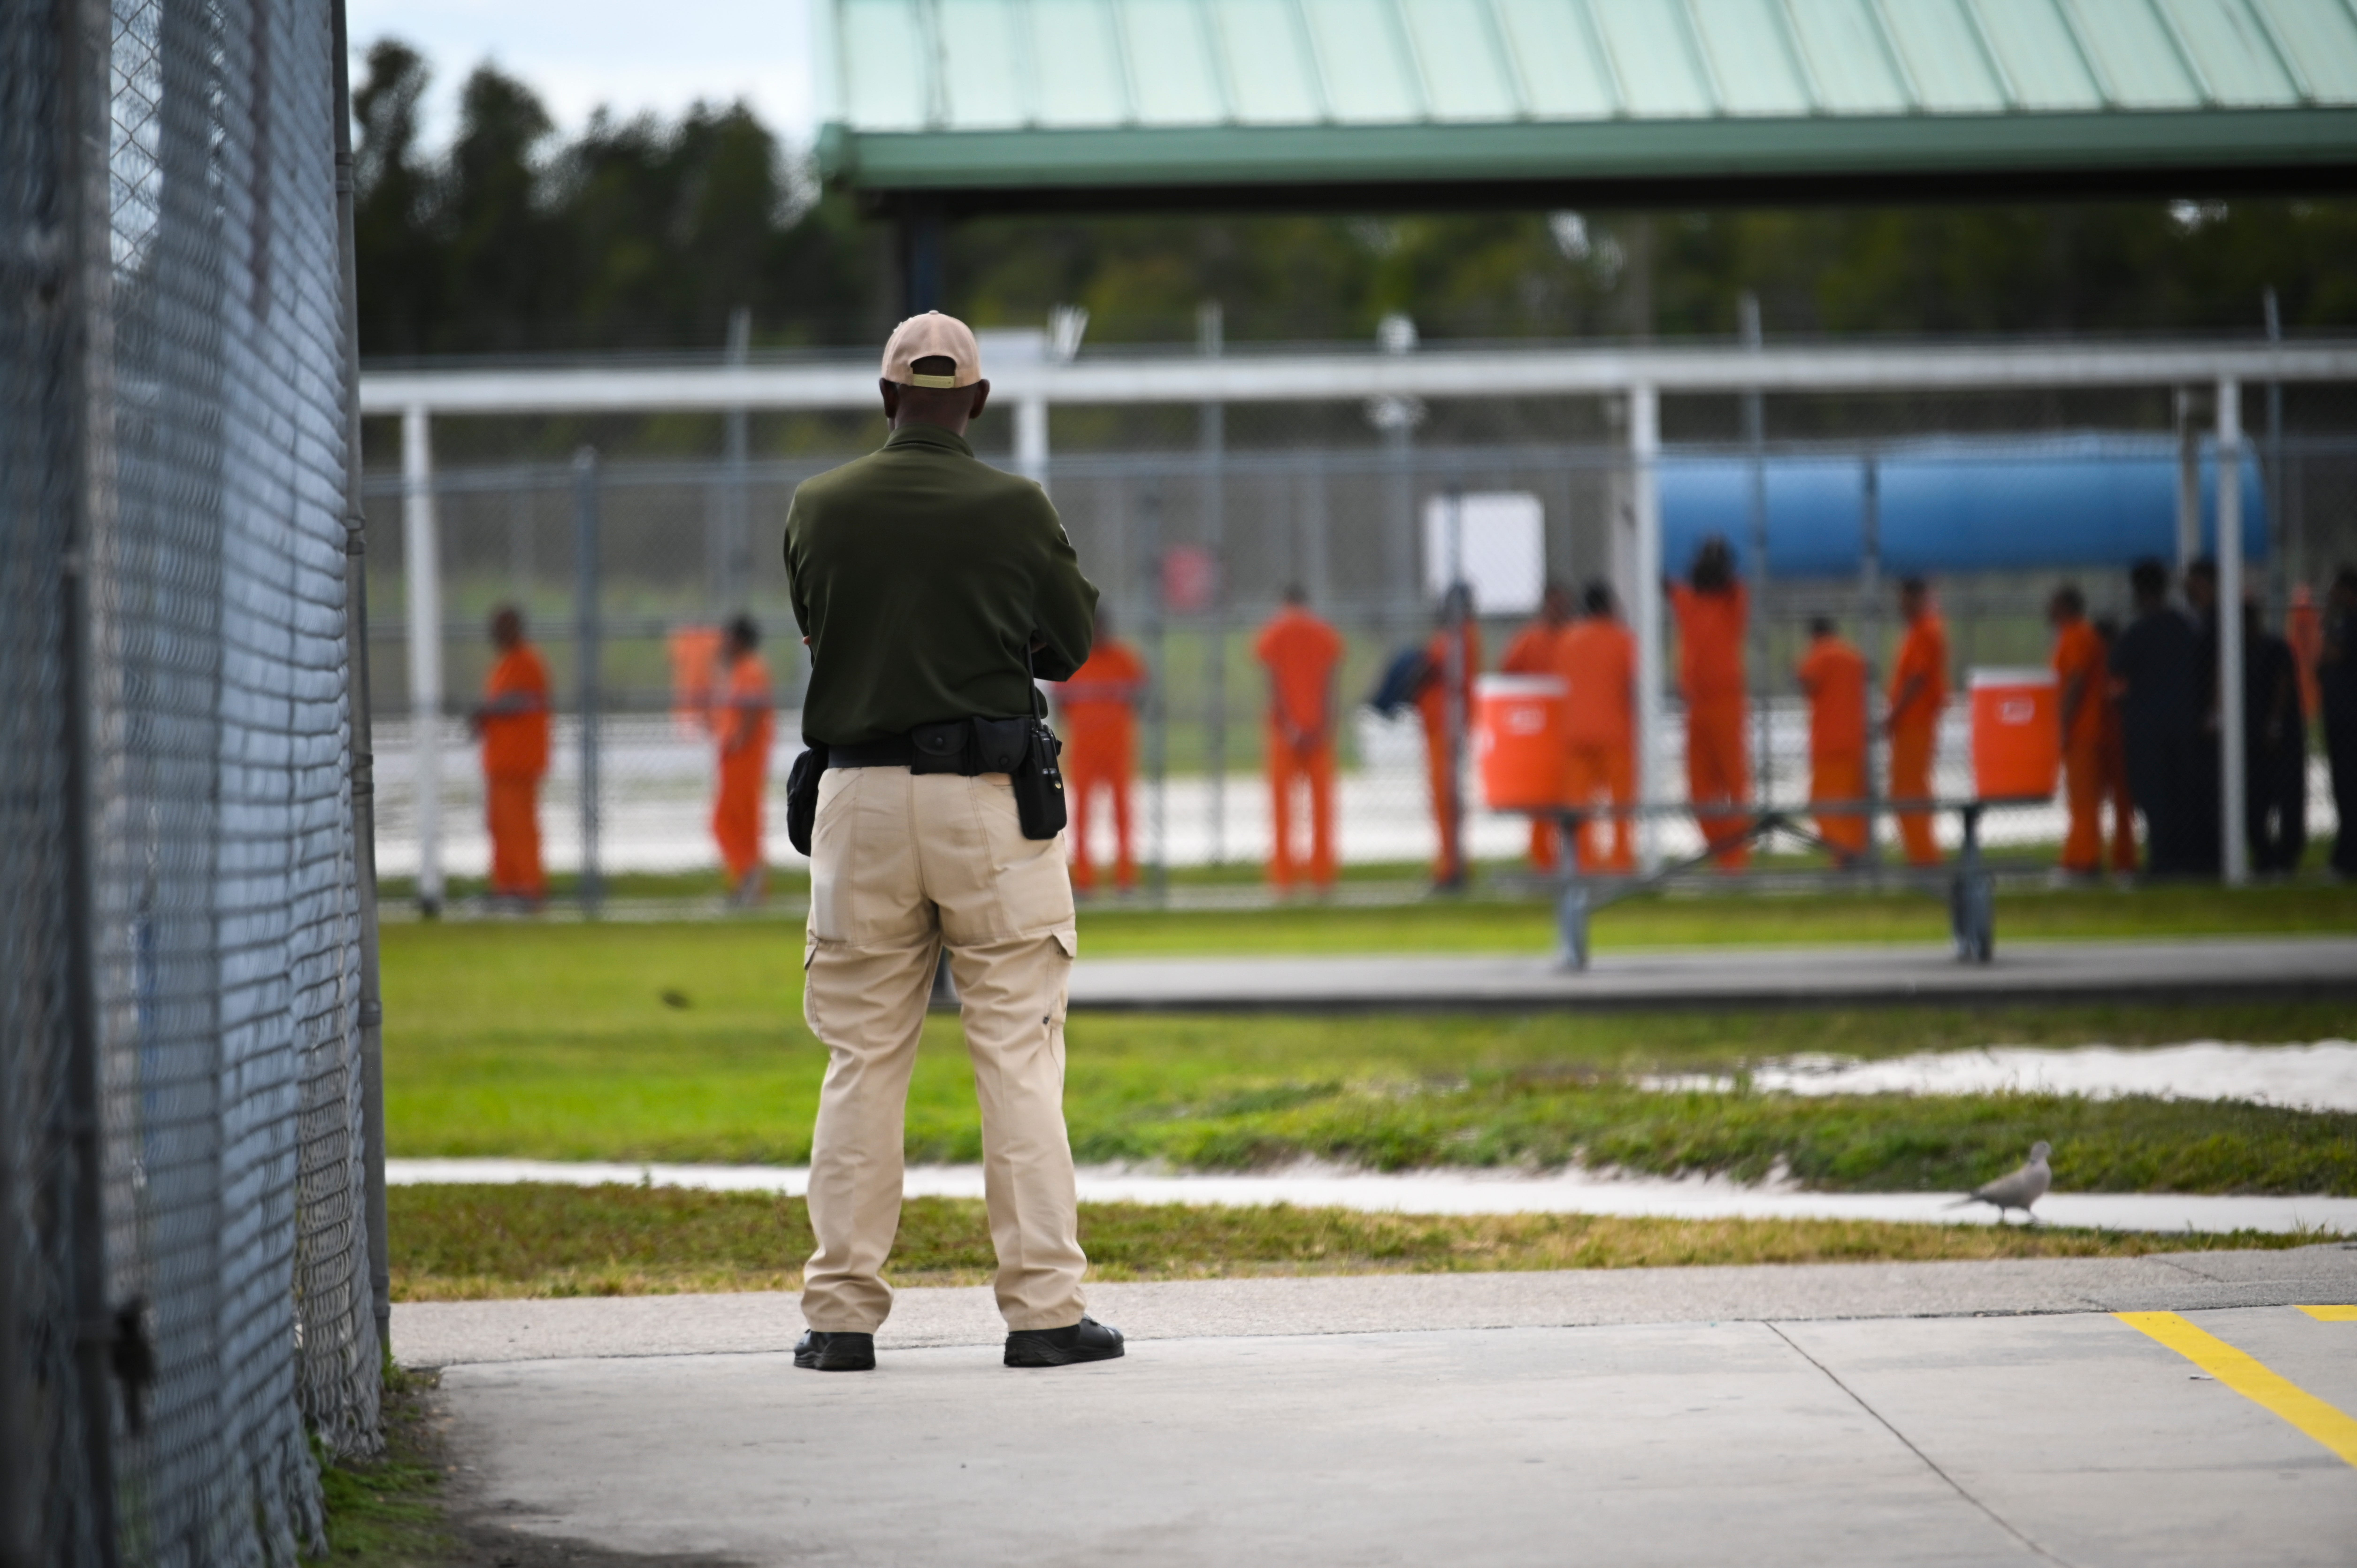 Costly prison fees are putting inmates deep in debt